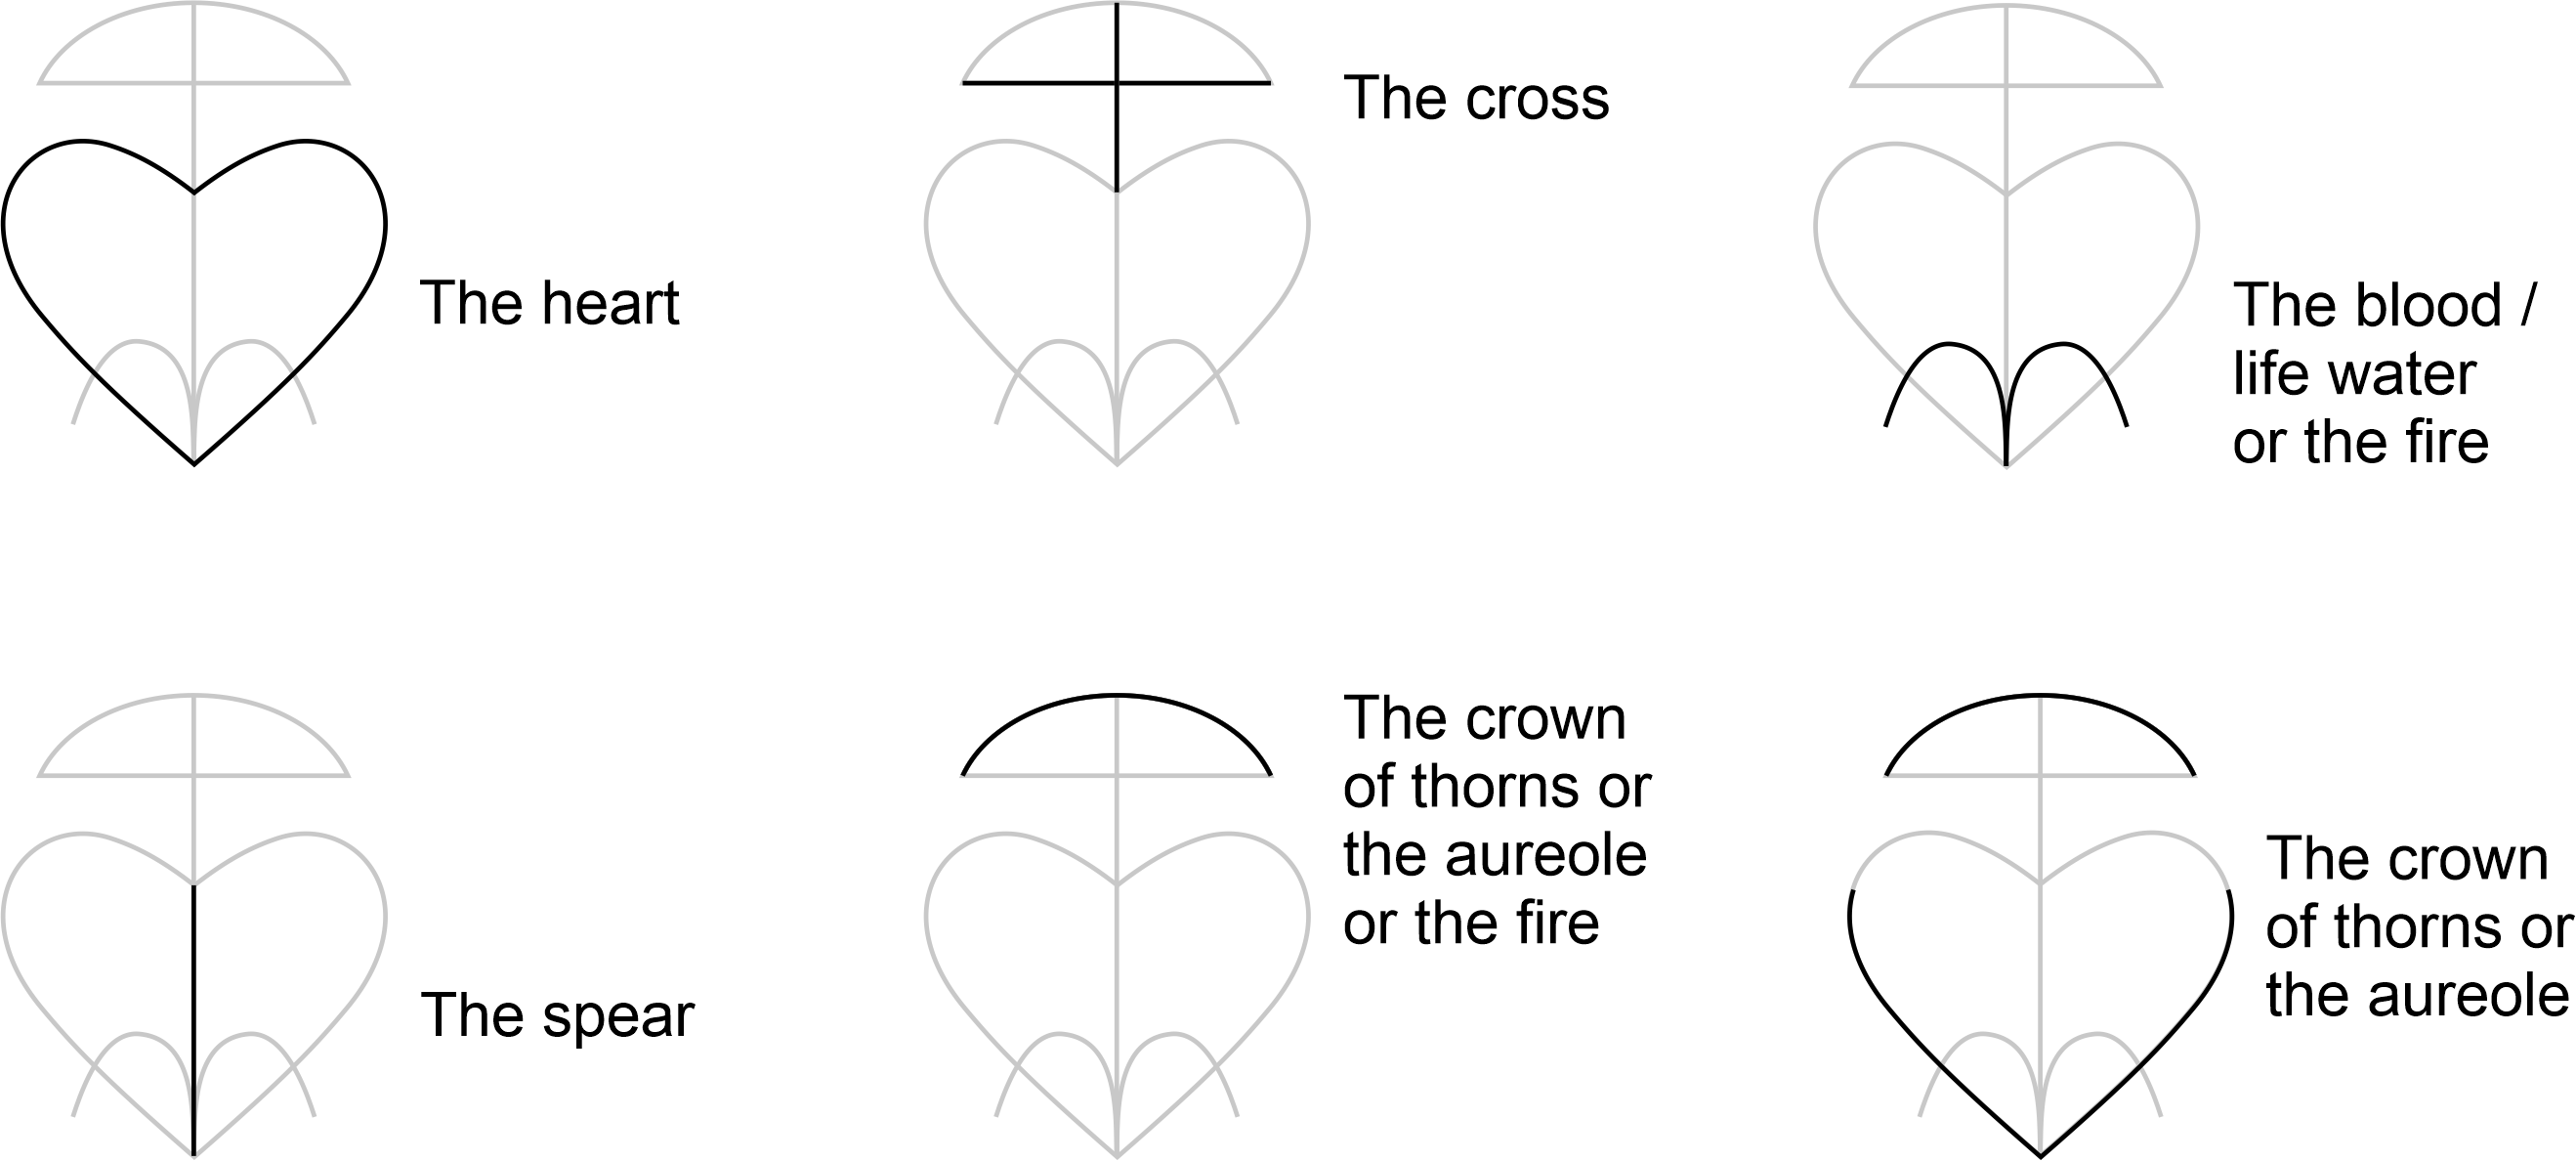 The Mayil hieroglyph and the Sacred Heart